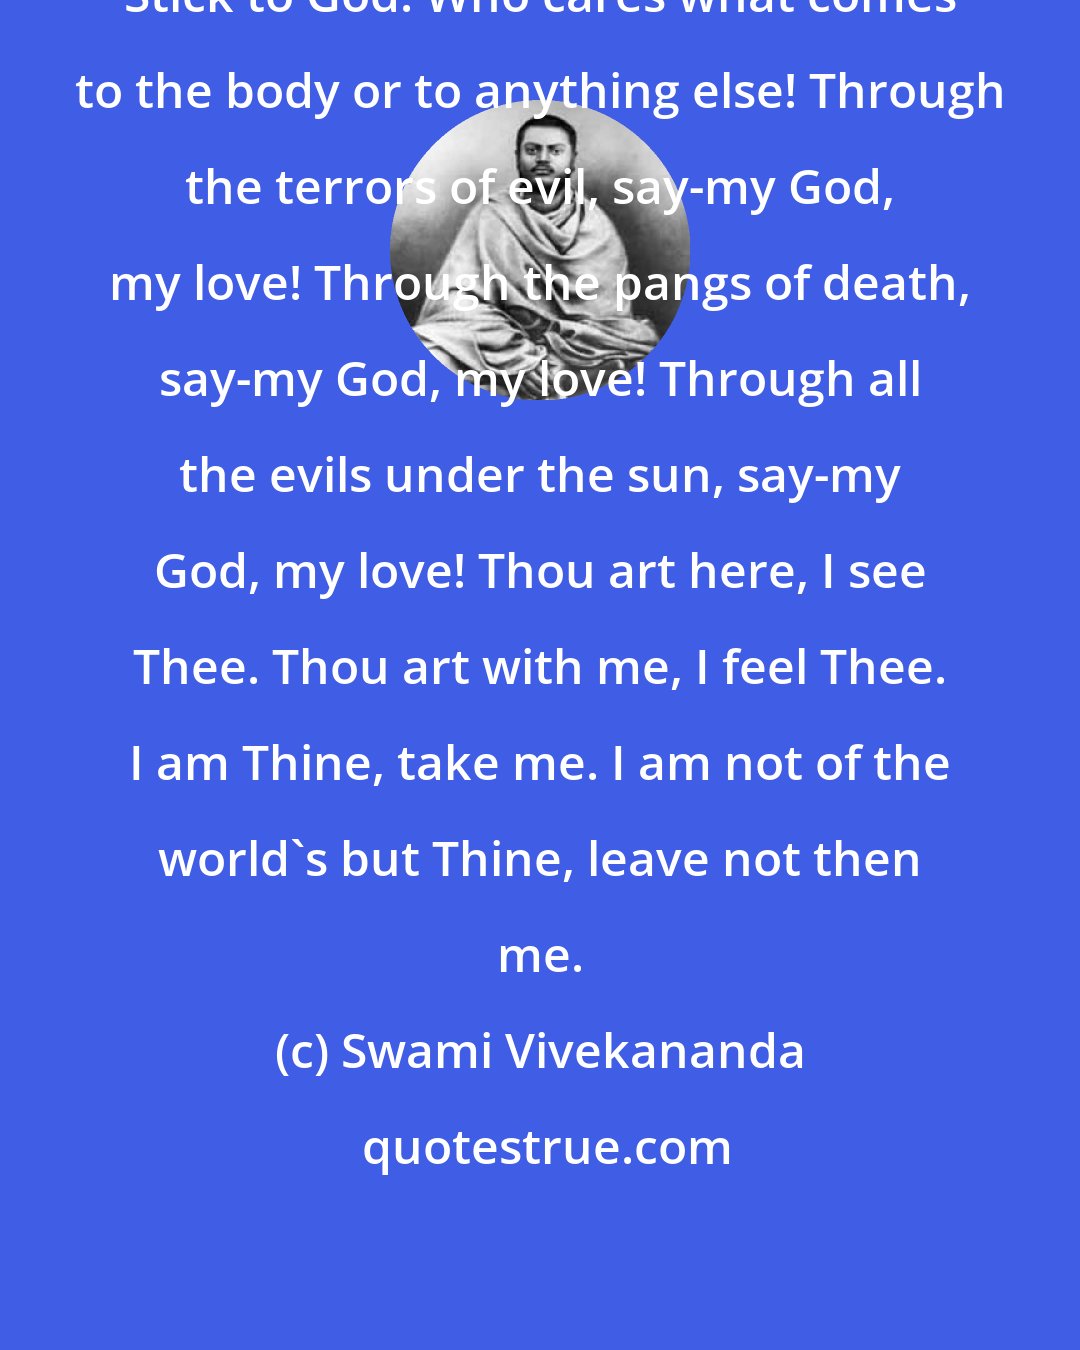 Swami Vivekananda: Stick to God! Who cares what comes to the body or to anything else! Through the terrors of evil, say-my God, my love! Through the pangs of death, say-my God, my love! Through all the evils under the sun, say-my God, my love! Thou art here, I see Thee. Thou art with me, I feel Thee. I am Thine, take me. I am not of the world's but Thine, leave not then me.